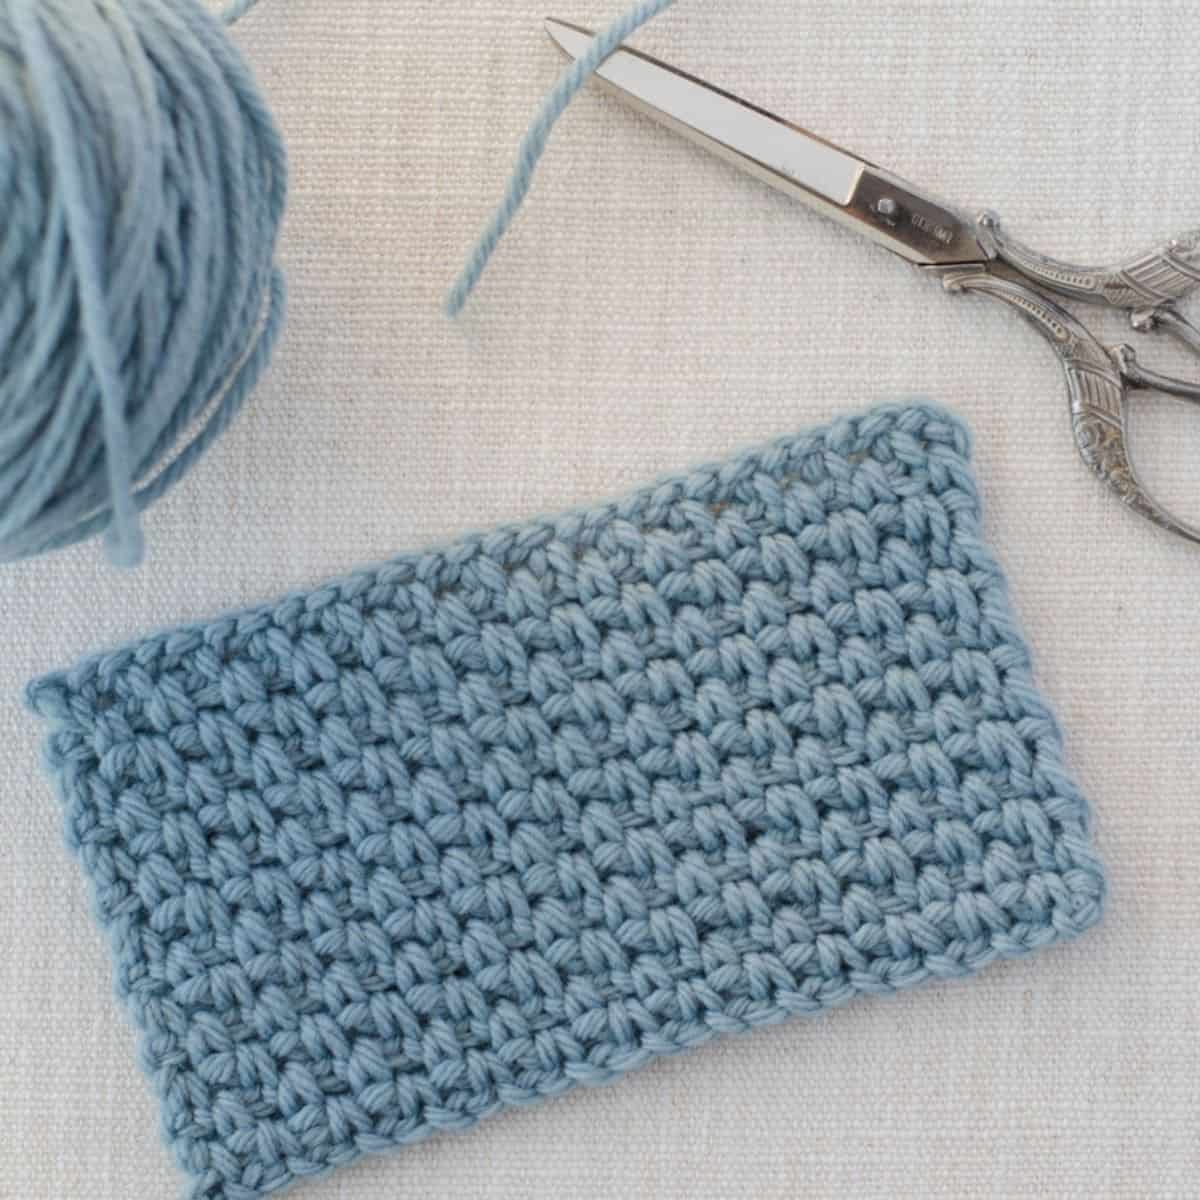 swatch of the linen crochet stitch next to yarn and a pair of scissors